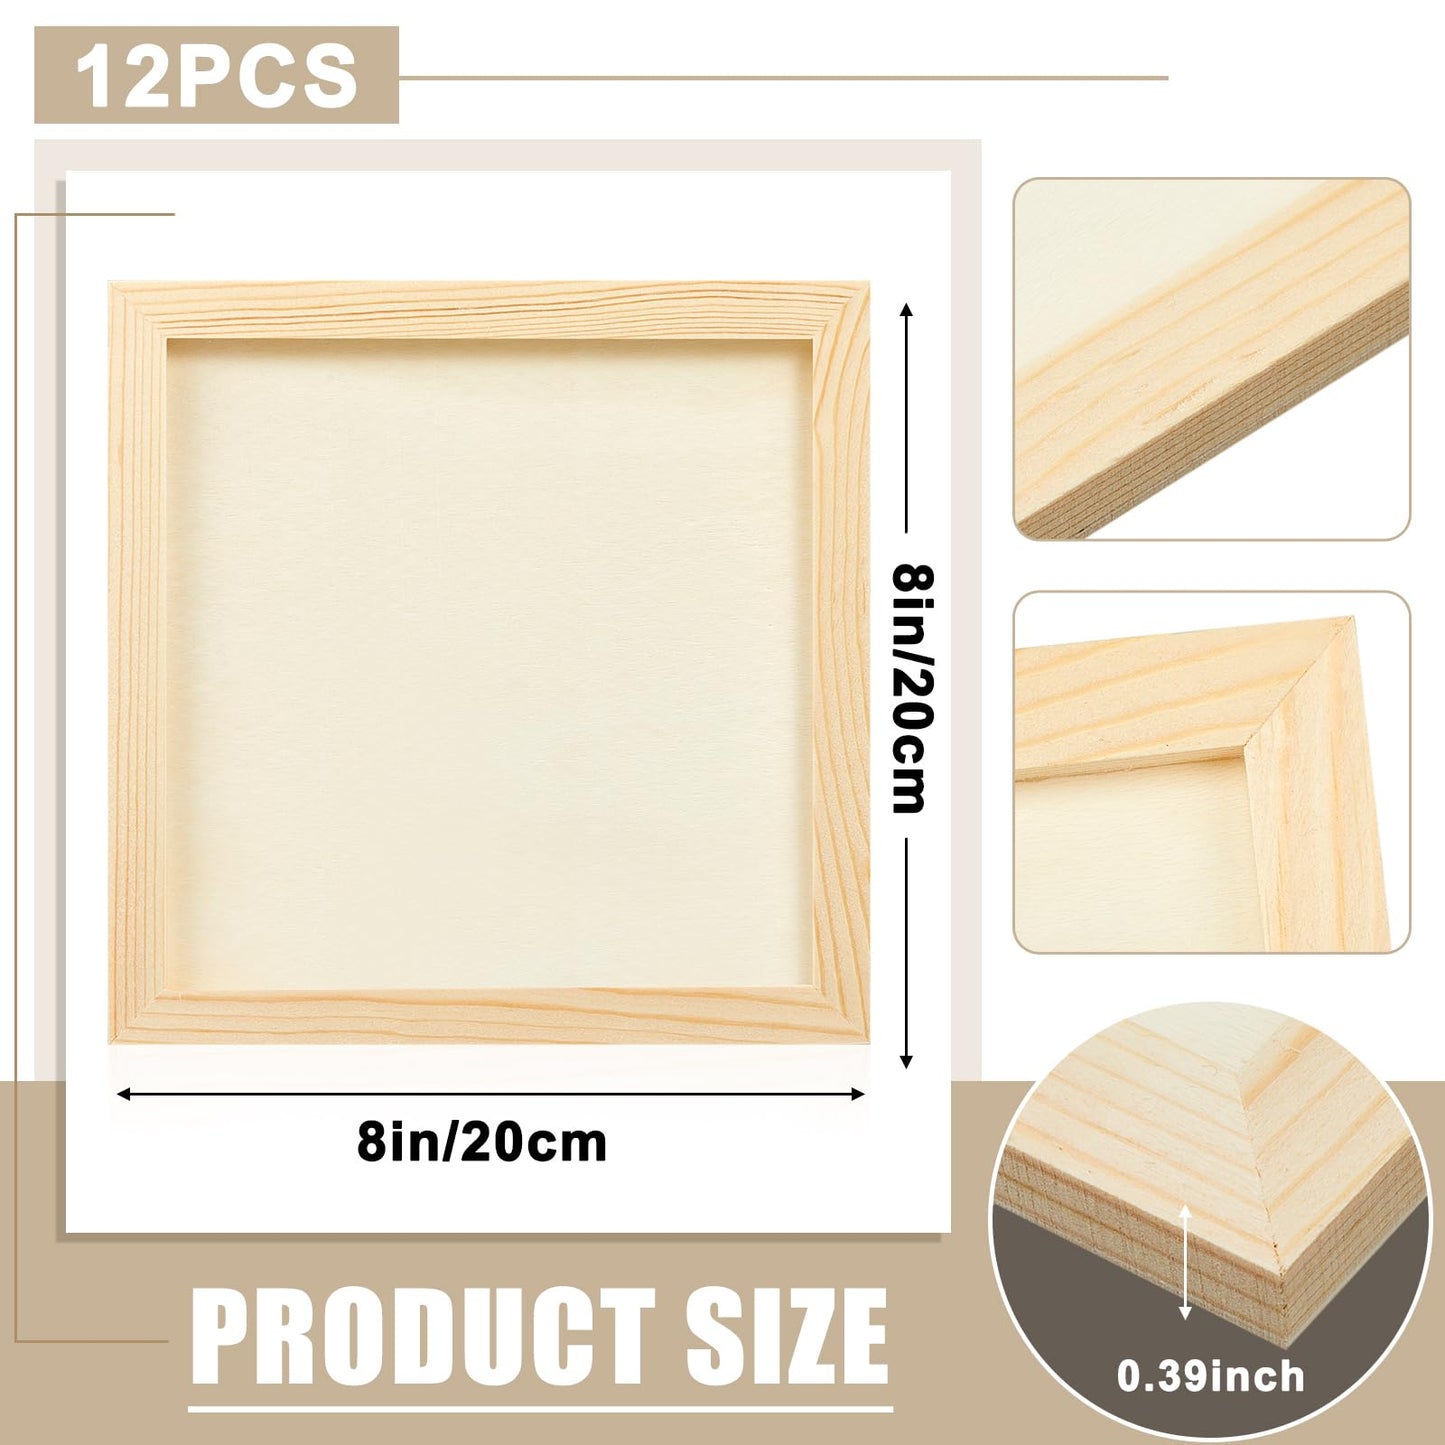 Kathfly 12 Pcs 8 x 8 Inch Pine Wood Panel Boards Unfinished Square Wood Panels Painting Panel Boards for Crafts Paint DIY Drawing Pouring Art